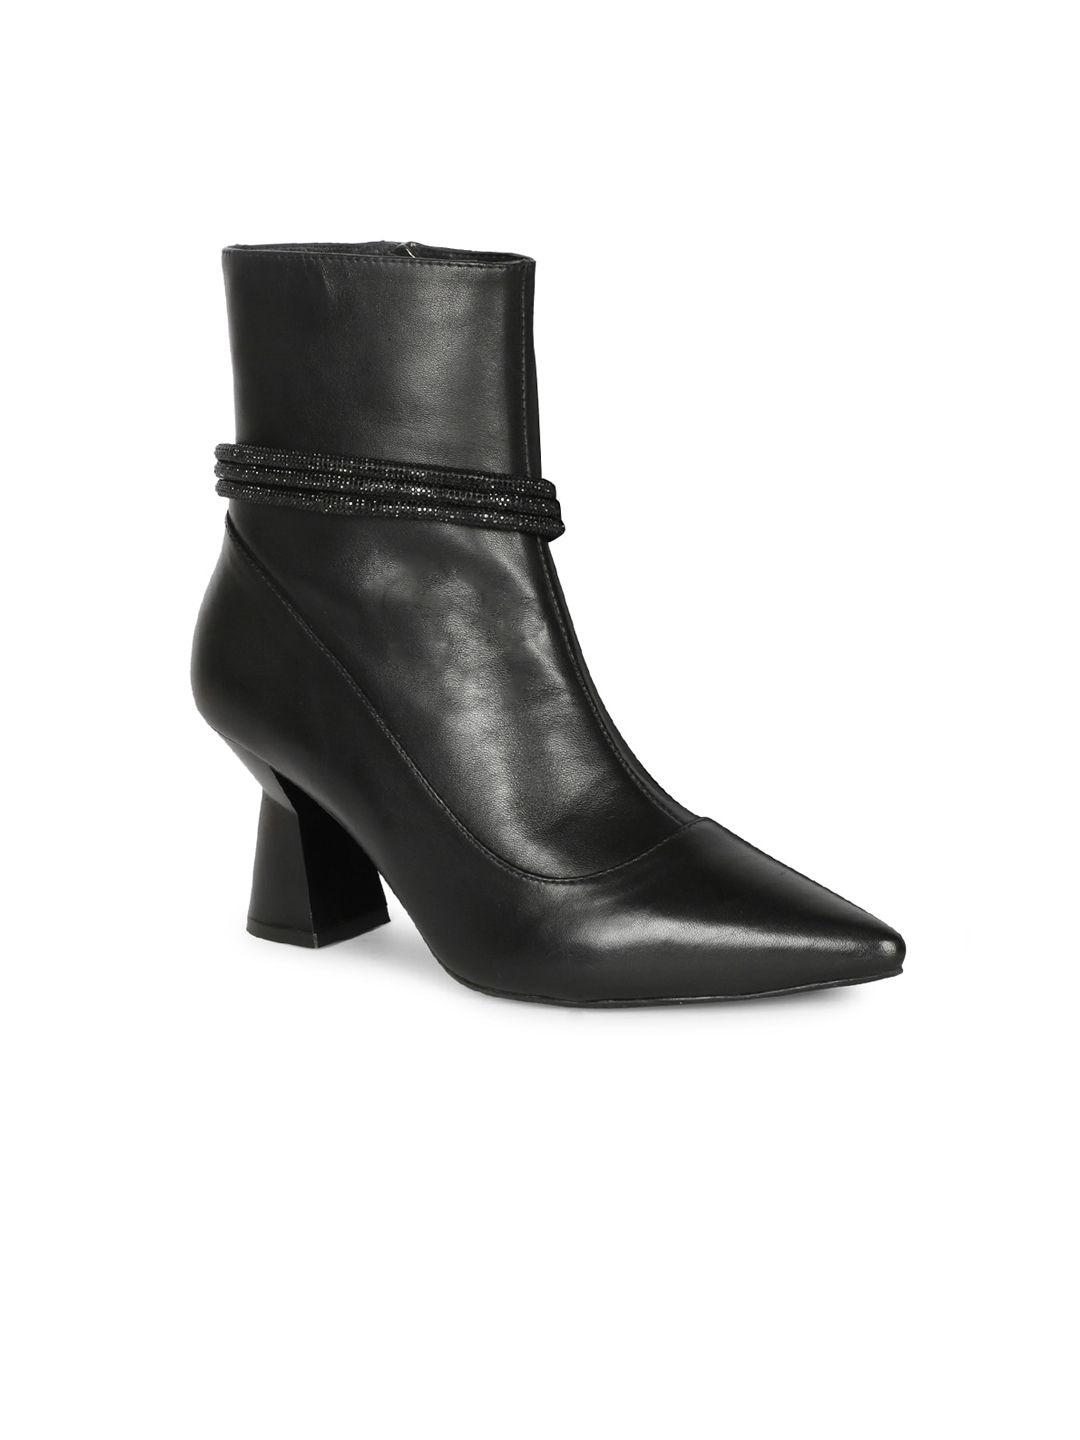 saint-g-black-leather-zipper-pointed-toe-heel-ankle-boots